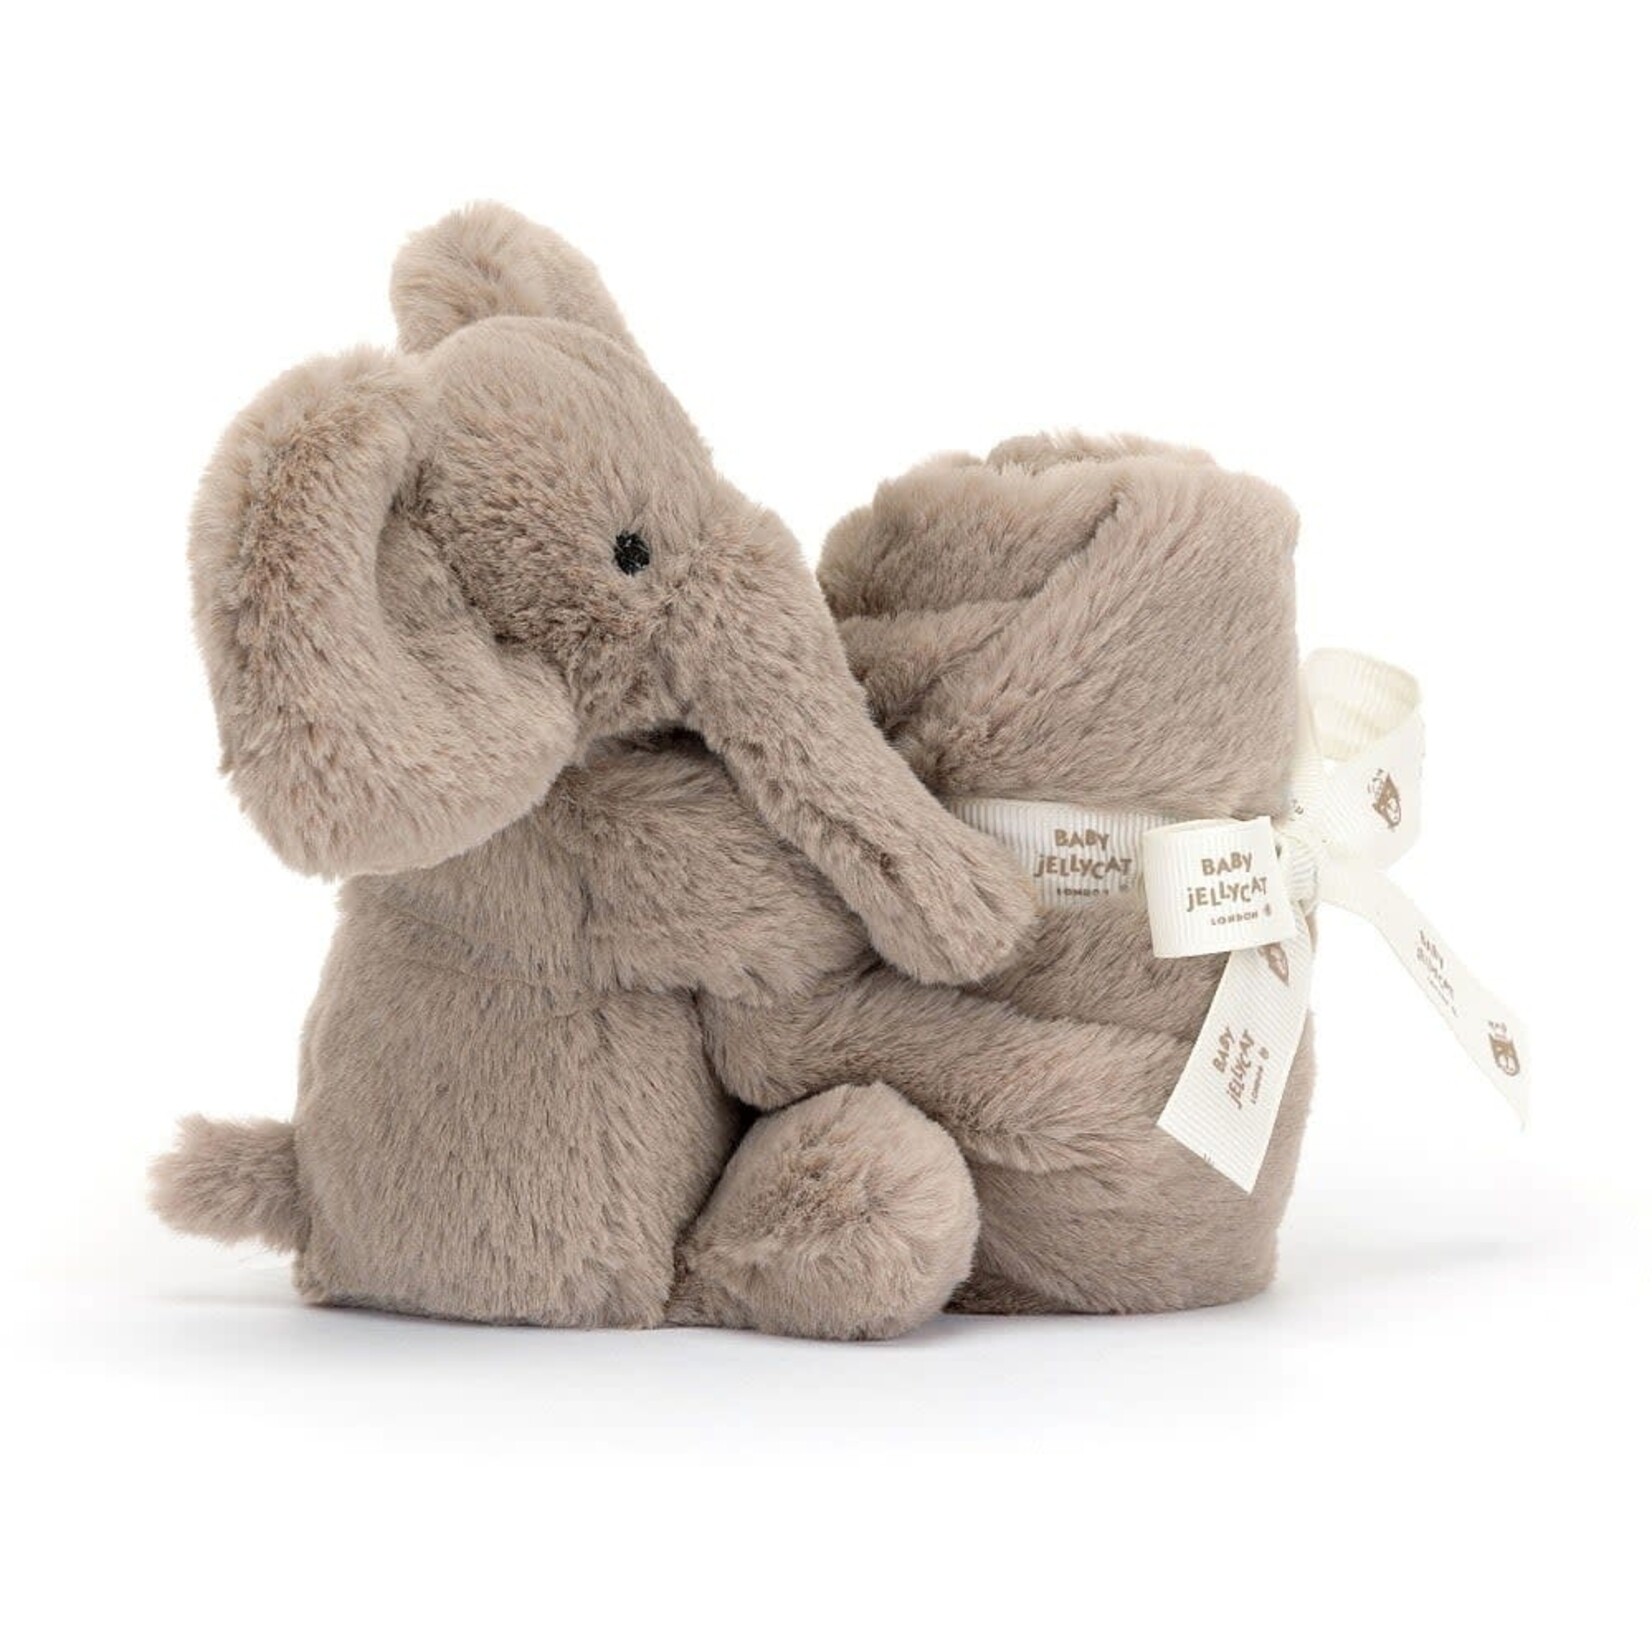 Jellycat Jellycat Smudge Elephant Soother